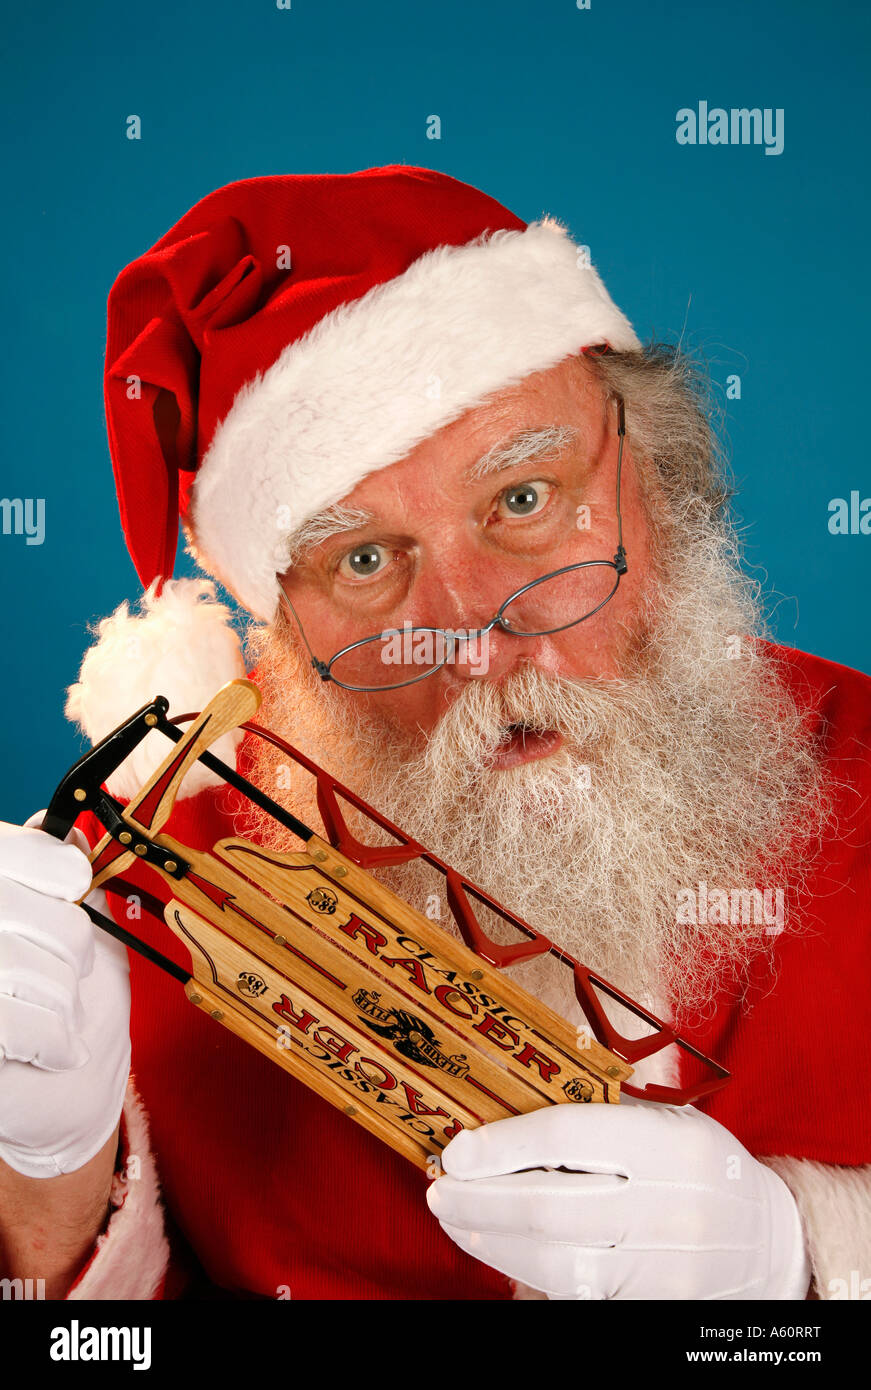 SANTA CLAUS HOLDS A SMALL RED SLED. Stock Photo